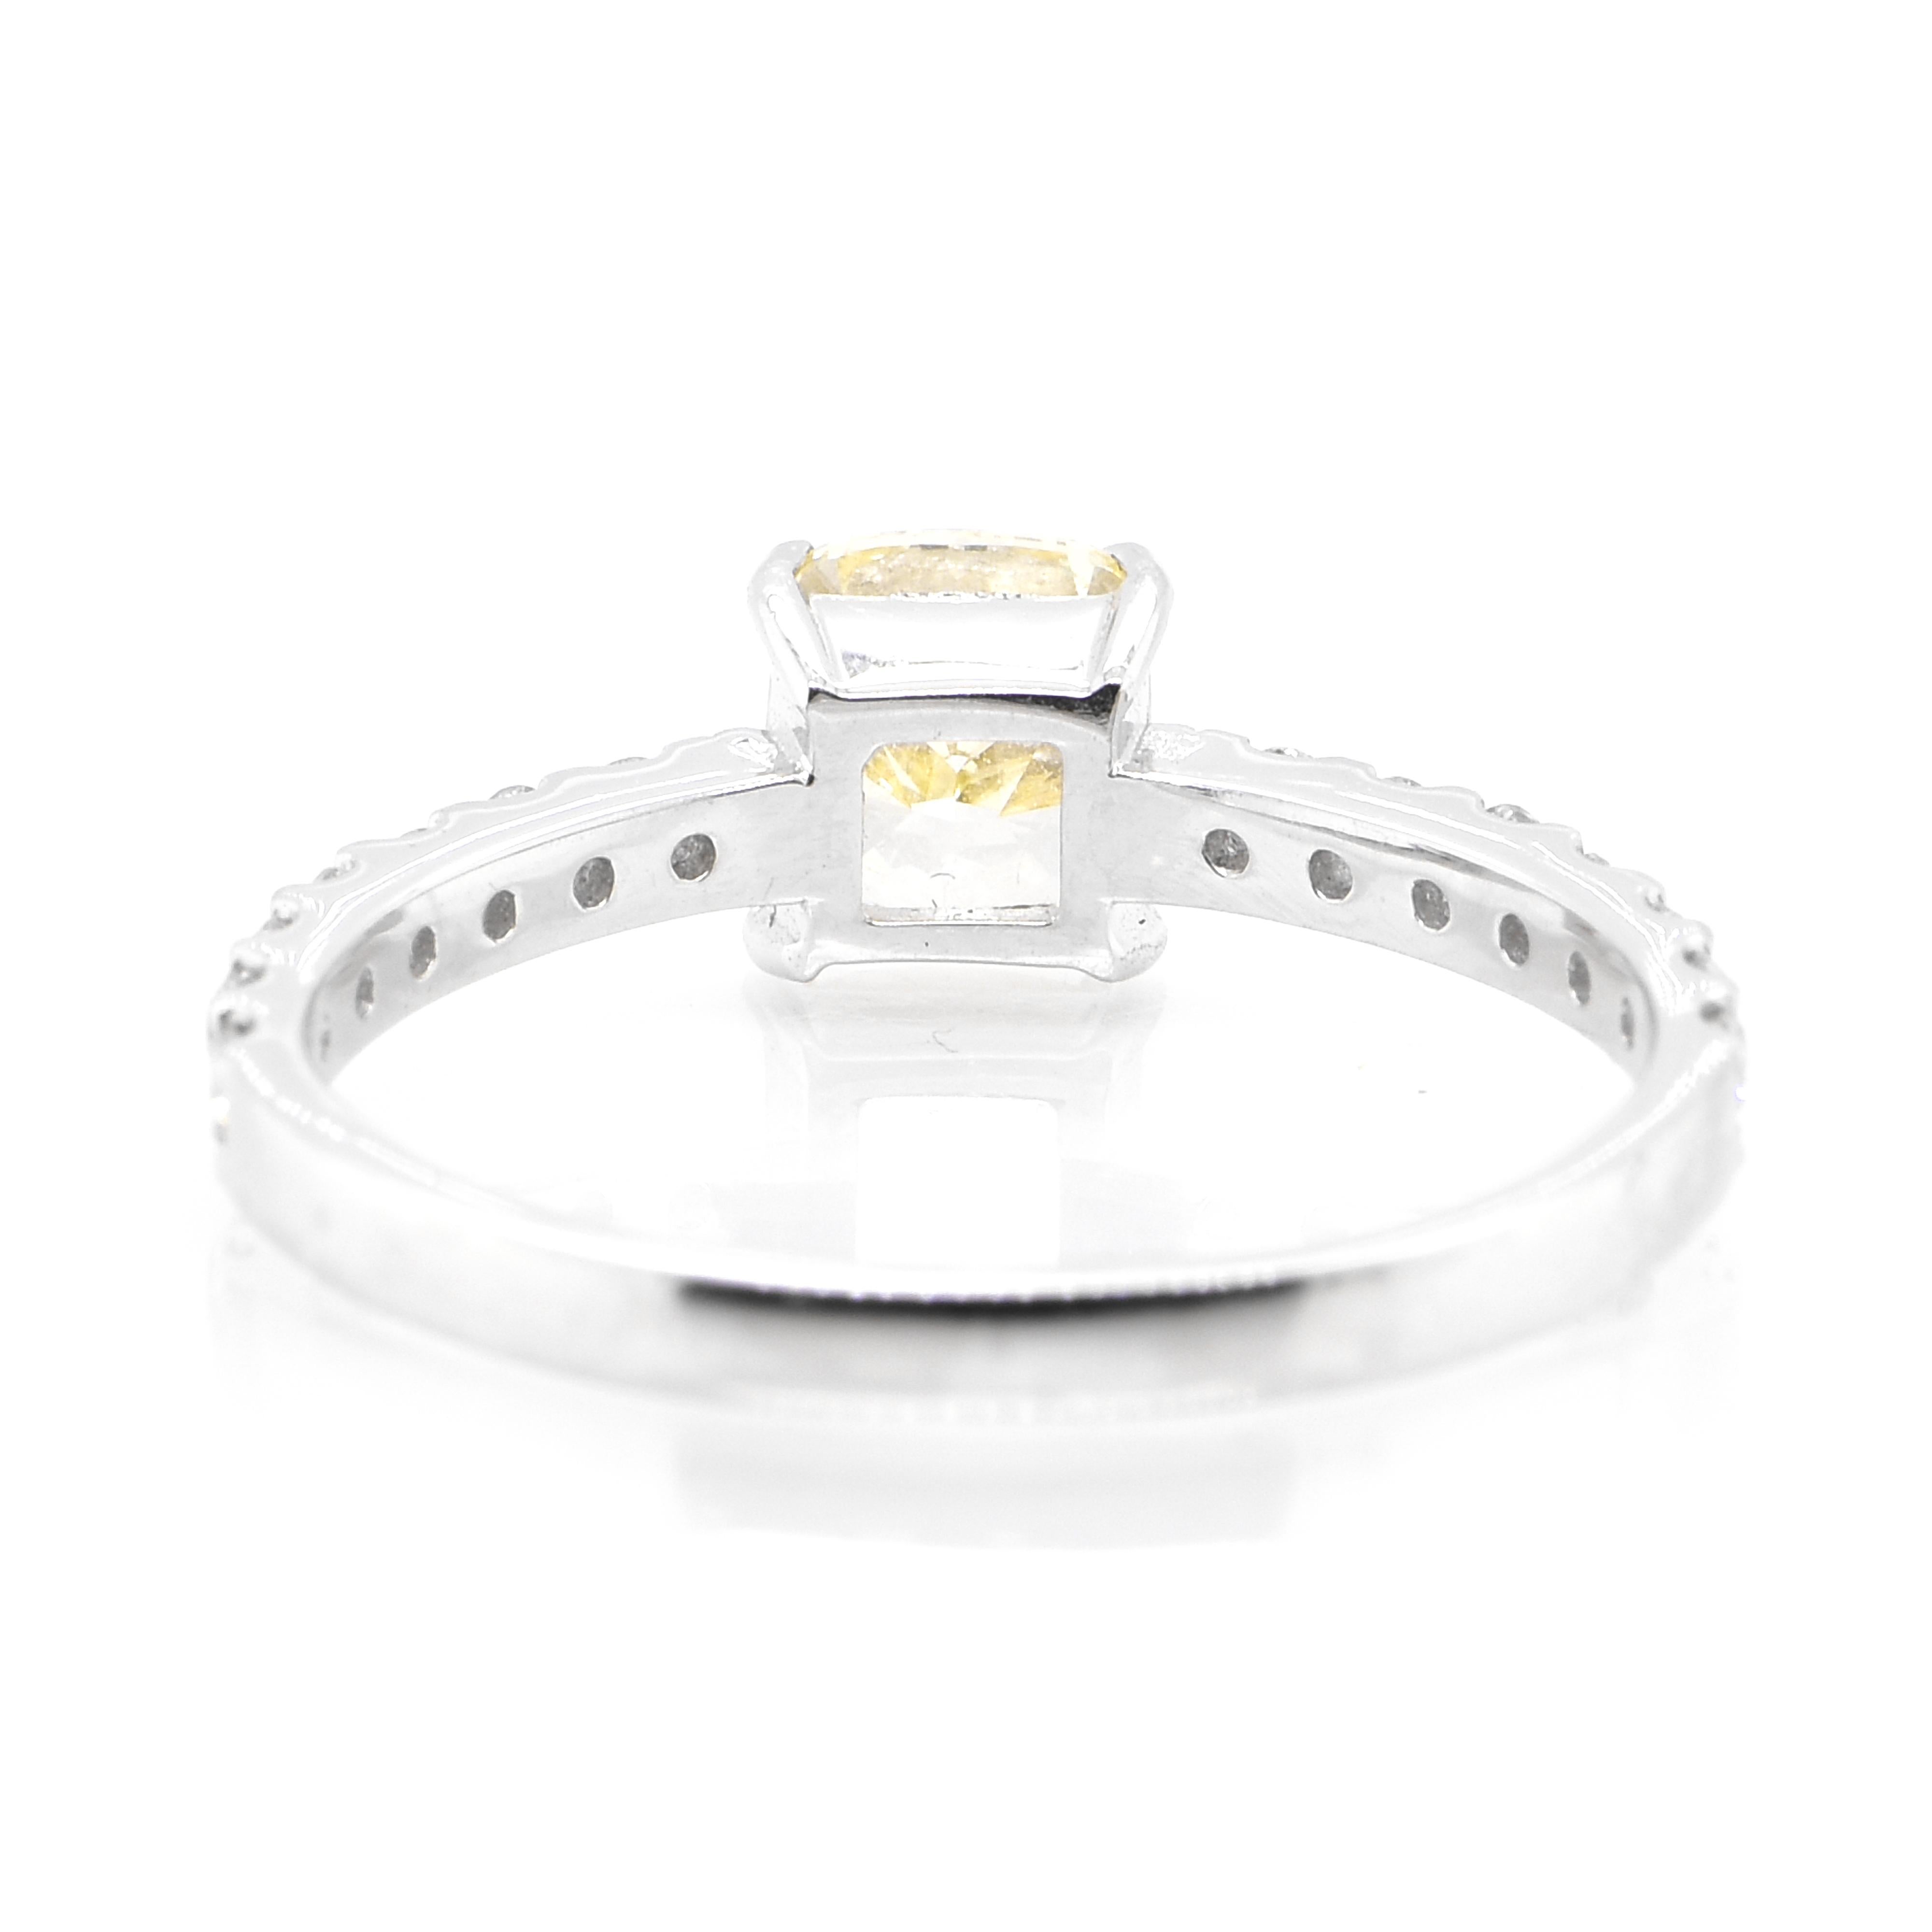 Women's 1.002 Carat, VS-1, Light Yellow, Earth-Mined Diamond Ring made in Platinum For Sale